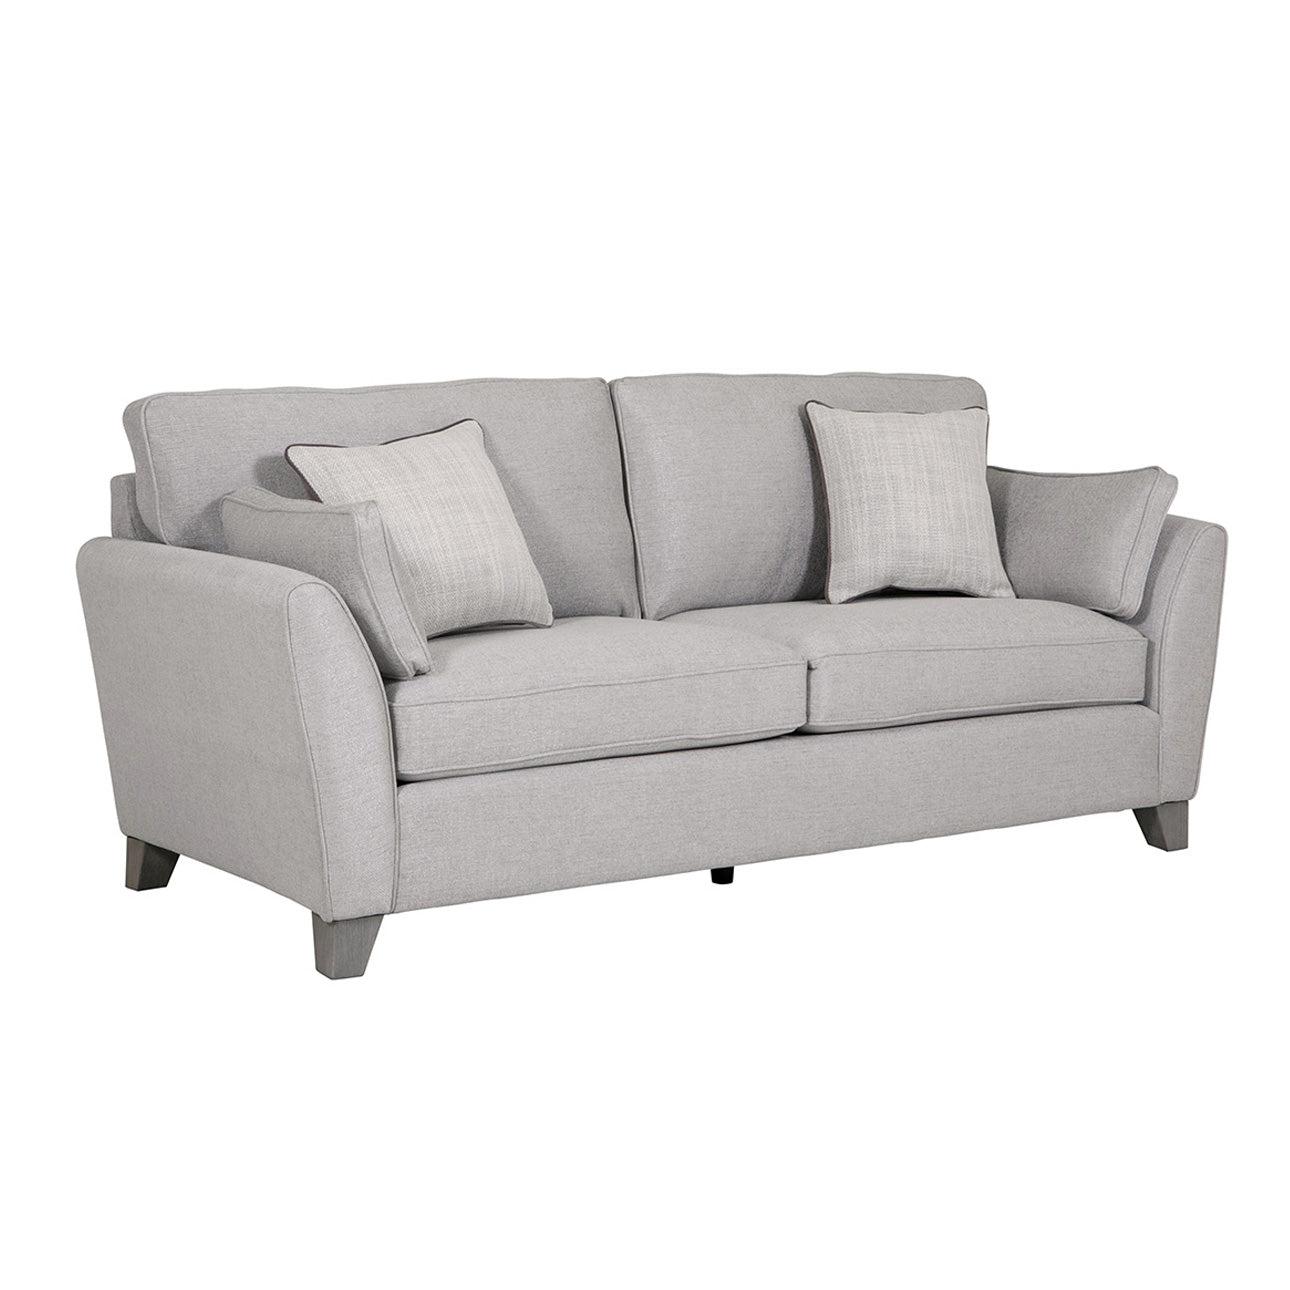 Cantrell 3 Seater - Light Grey